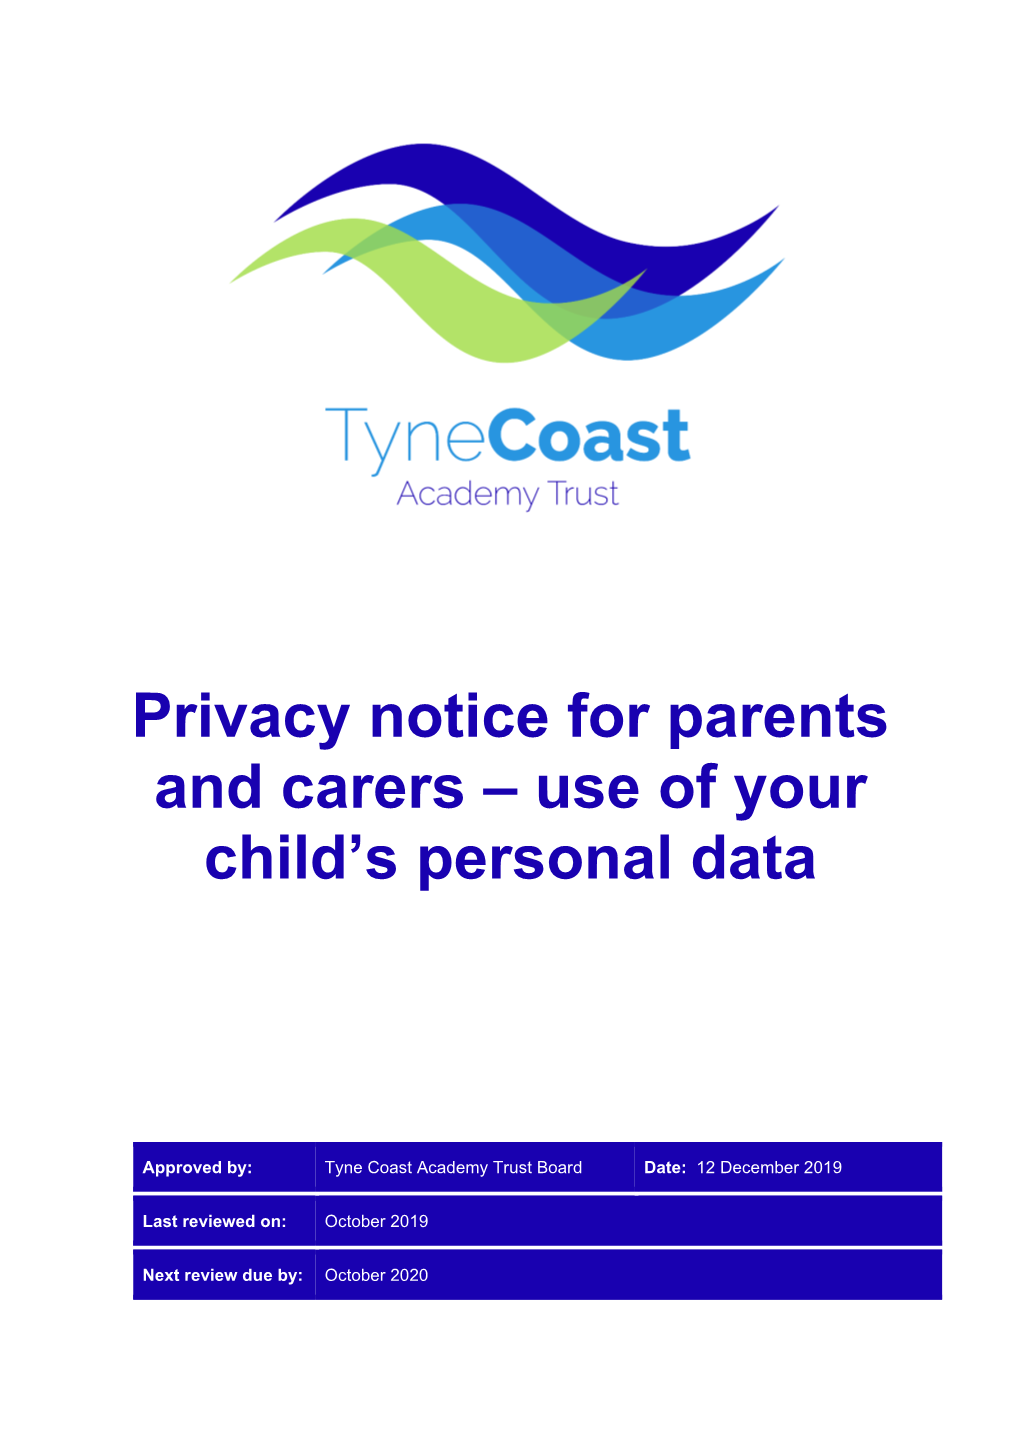 Privacy Notice for Parents and Carers – Use of Your Child's Personal Data